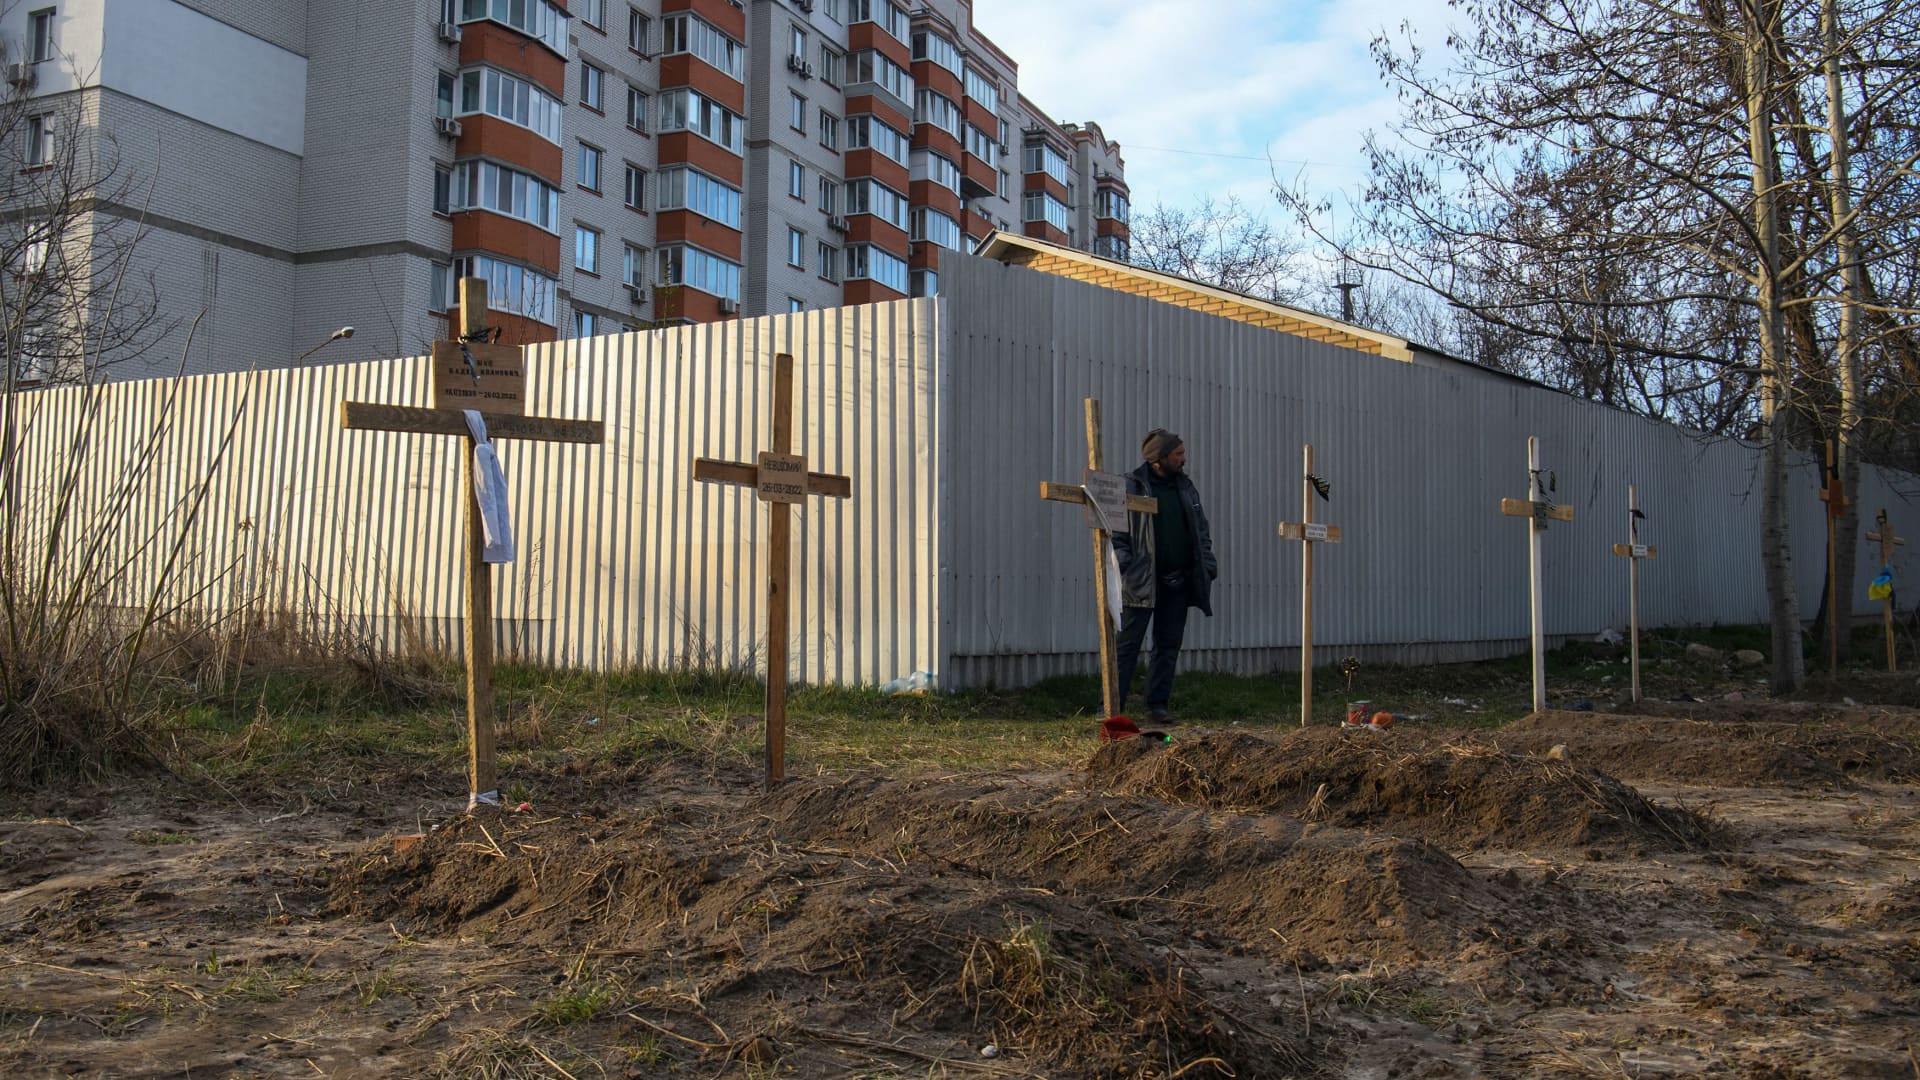 A man stands next to graves with bodies of civilians, who according to local residents were killed by Russian soldiers, as Russia's attack on Ukraine continues, in Bucha, in Kyiv region, Ukraine April 4, 2022.